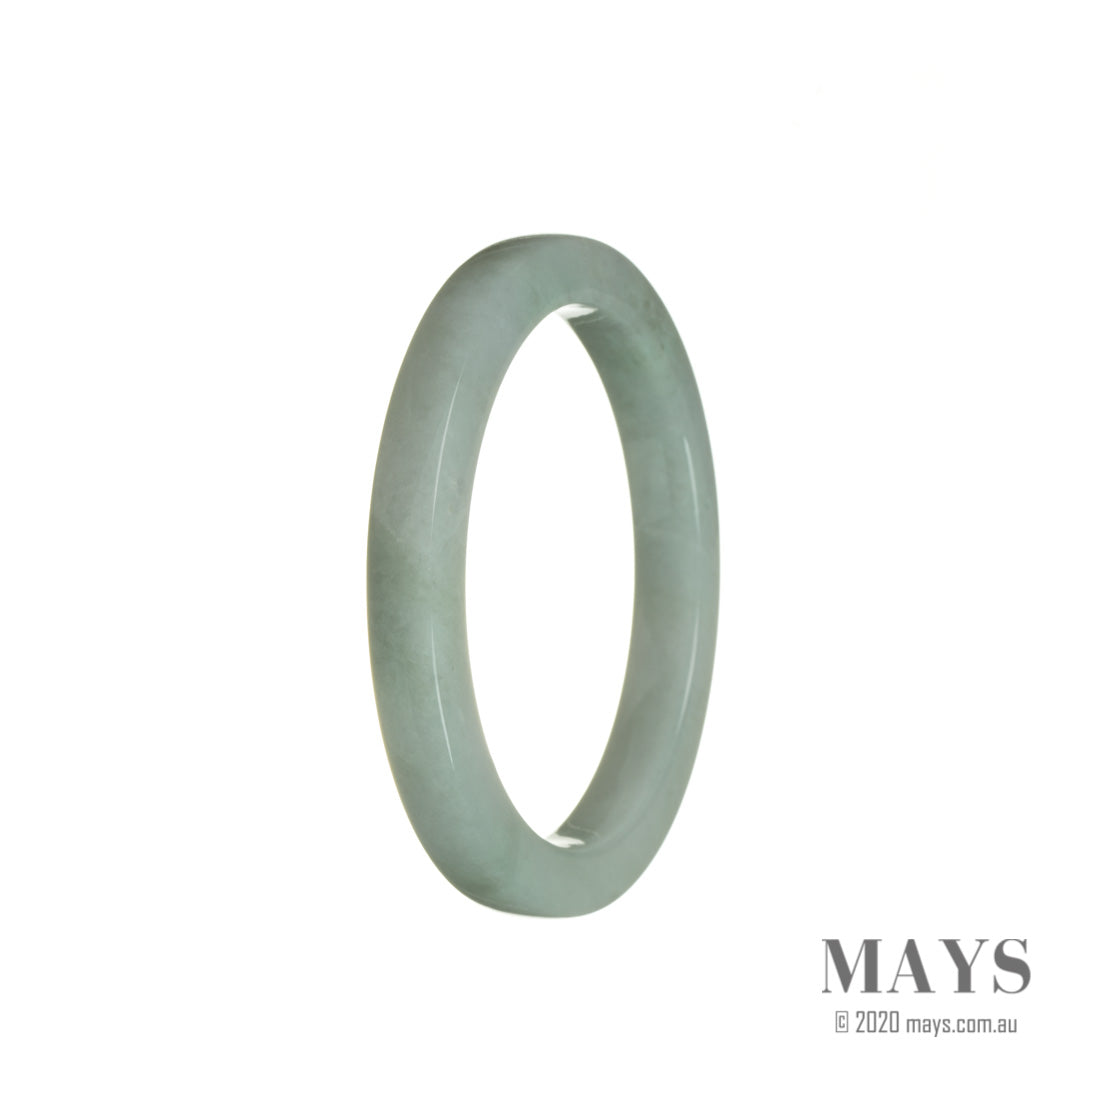 A close-up image of a thin white jadeite bangle bracelet, specifically a real Type A jadeite, with a diameter of 56mm. The bracelet is smooth and polished, showcasing its high-quality and elegant appearance.